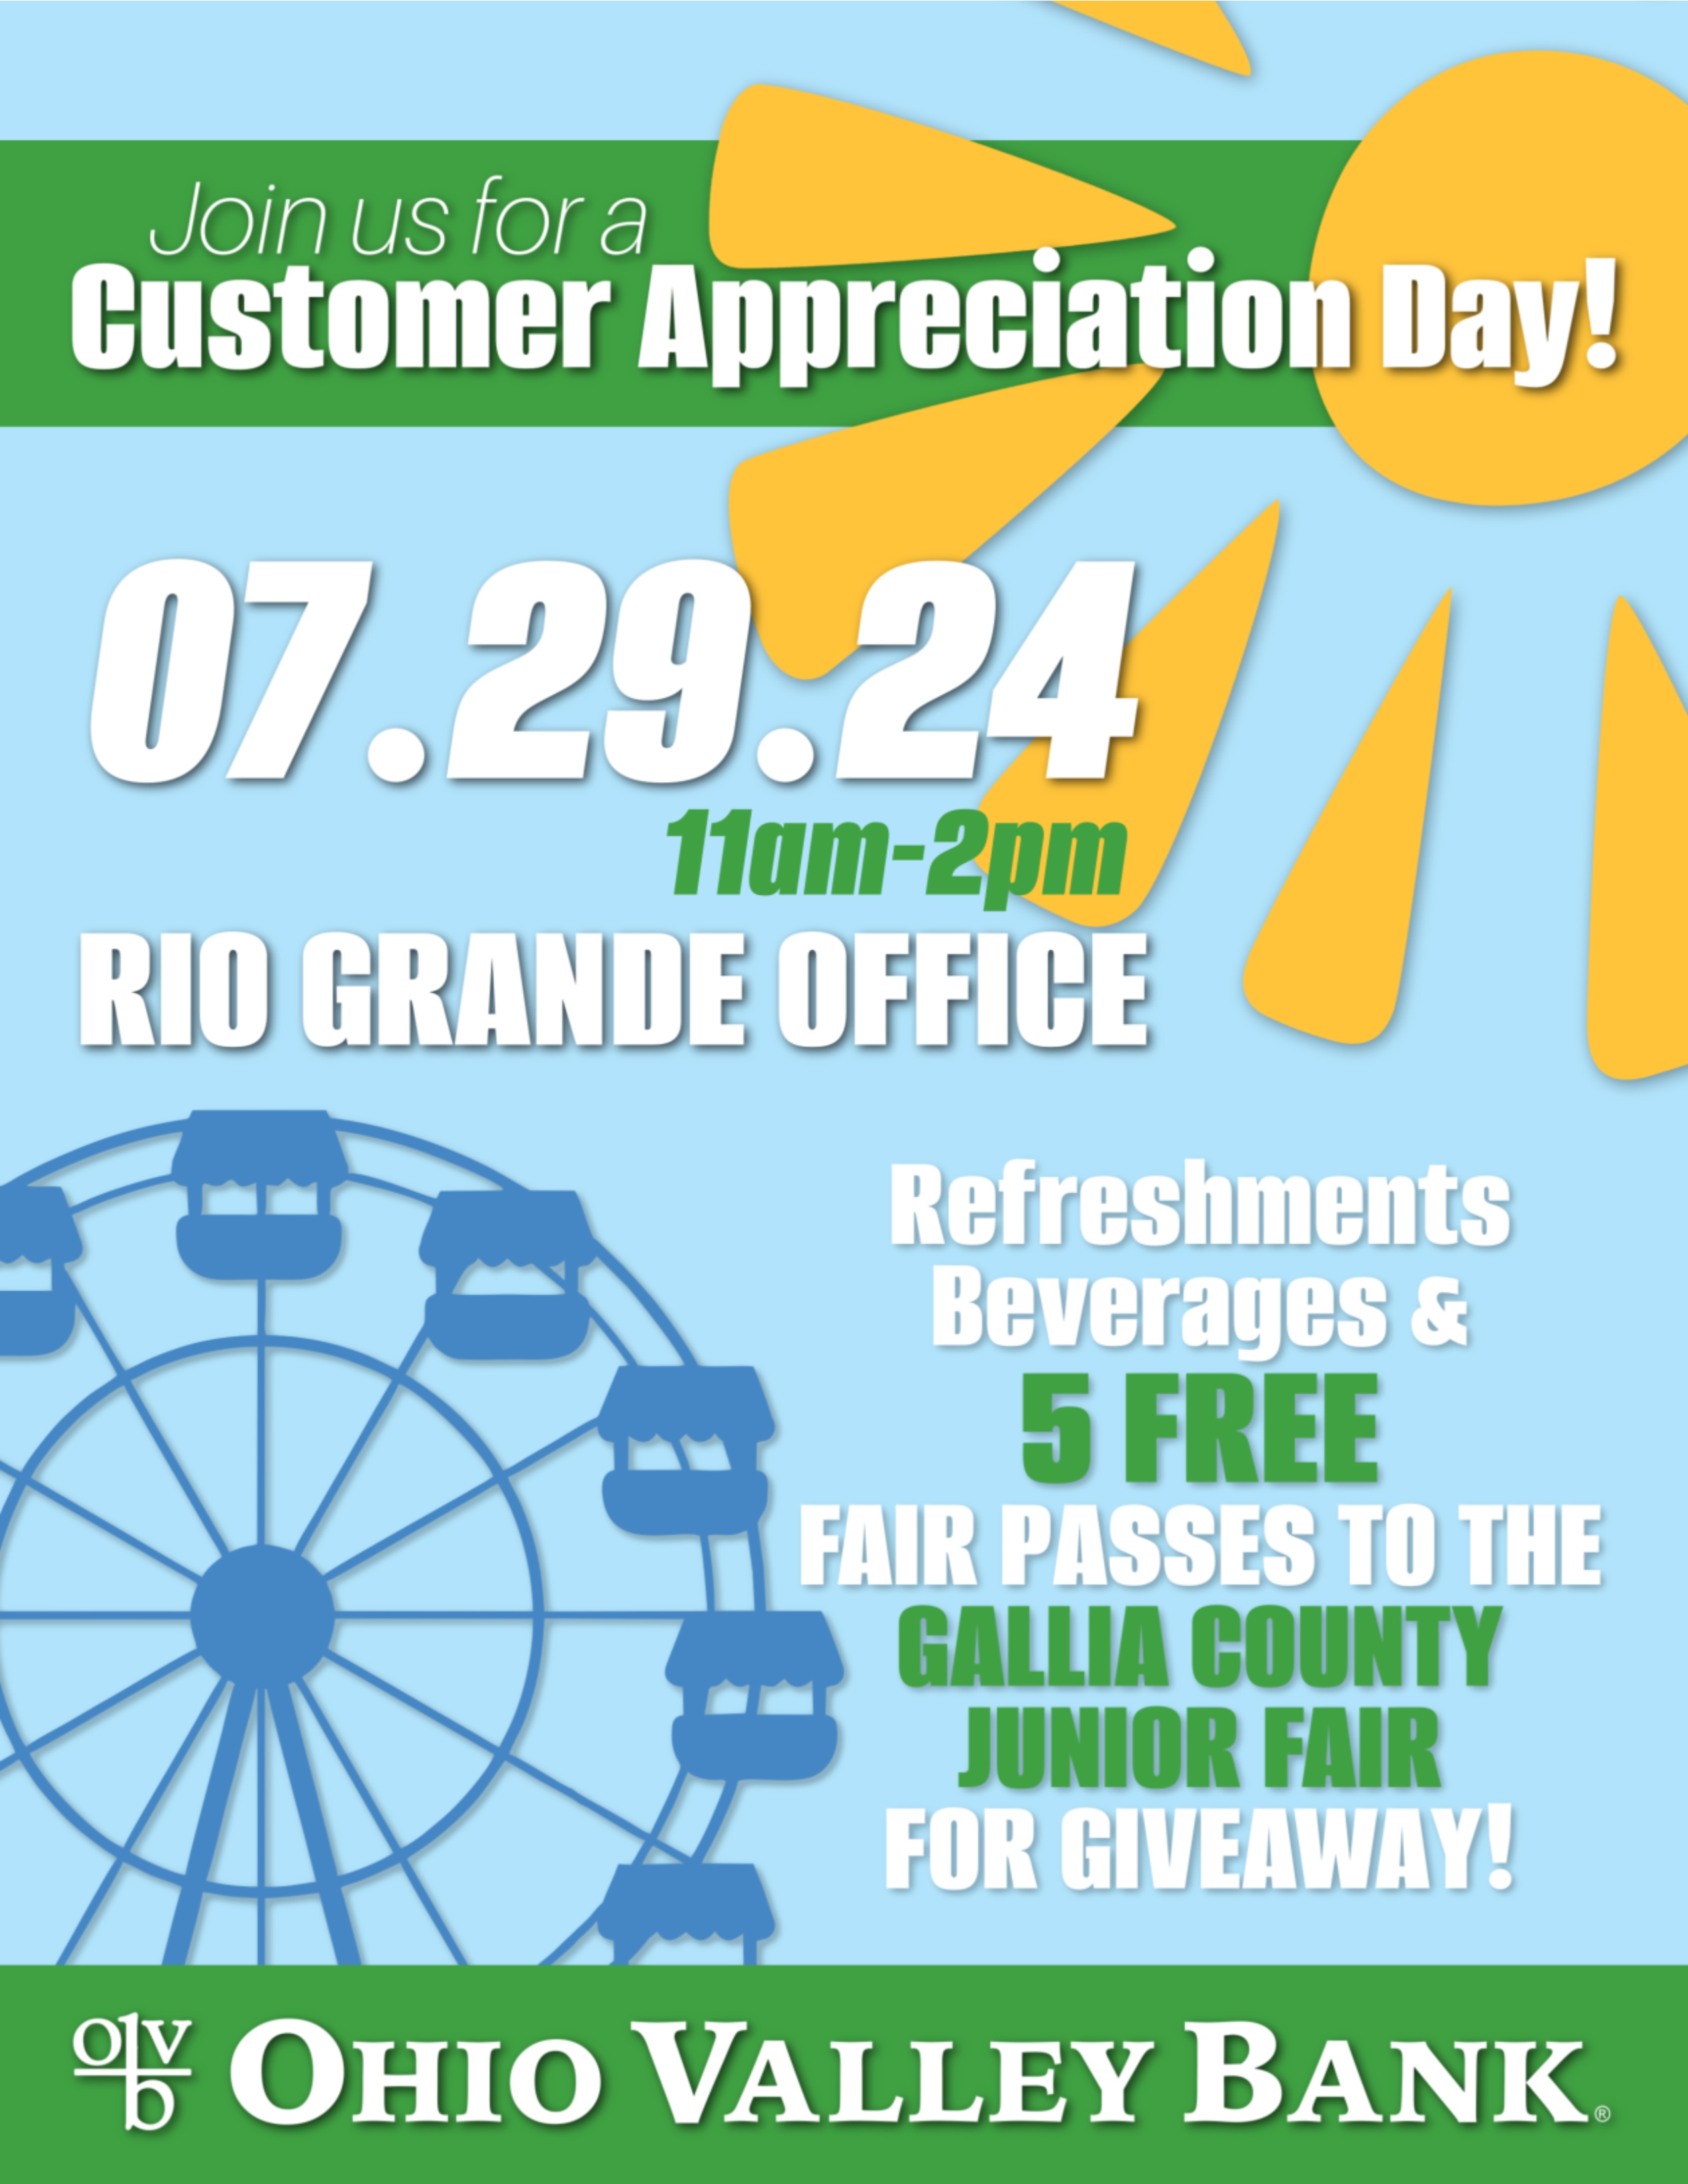 the point pleasant north office is holding a customer appreciation event on July 29th 2024. Between the hours of eleven a.m. and two p.m.